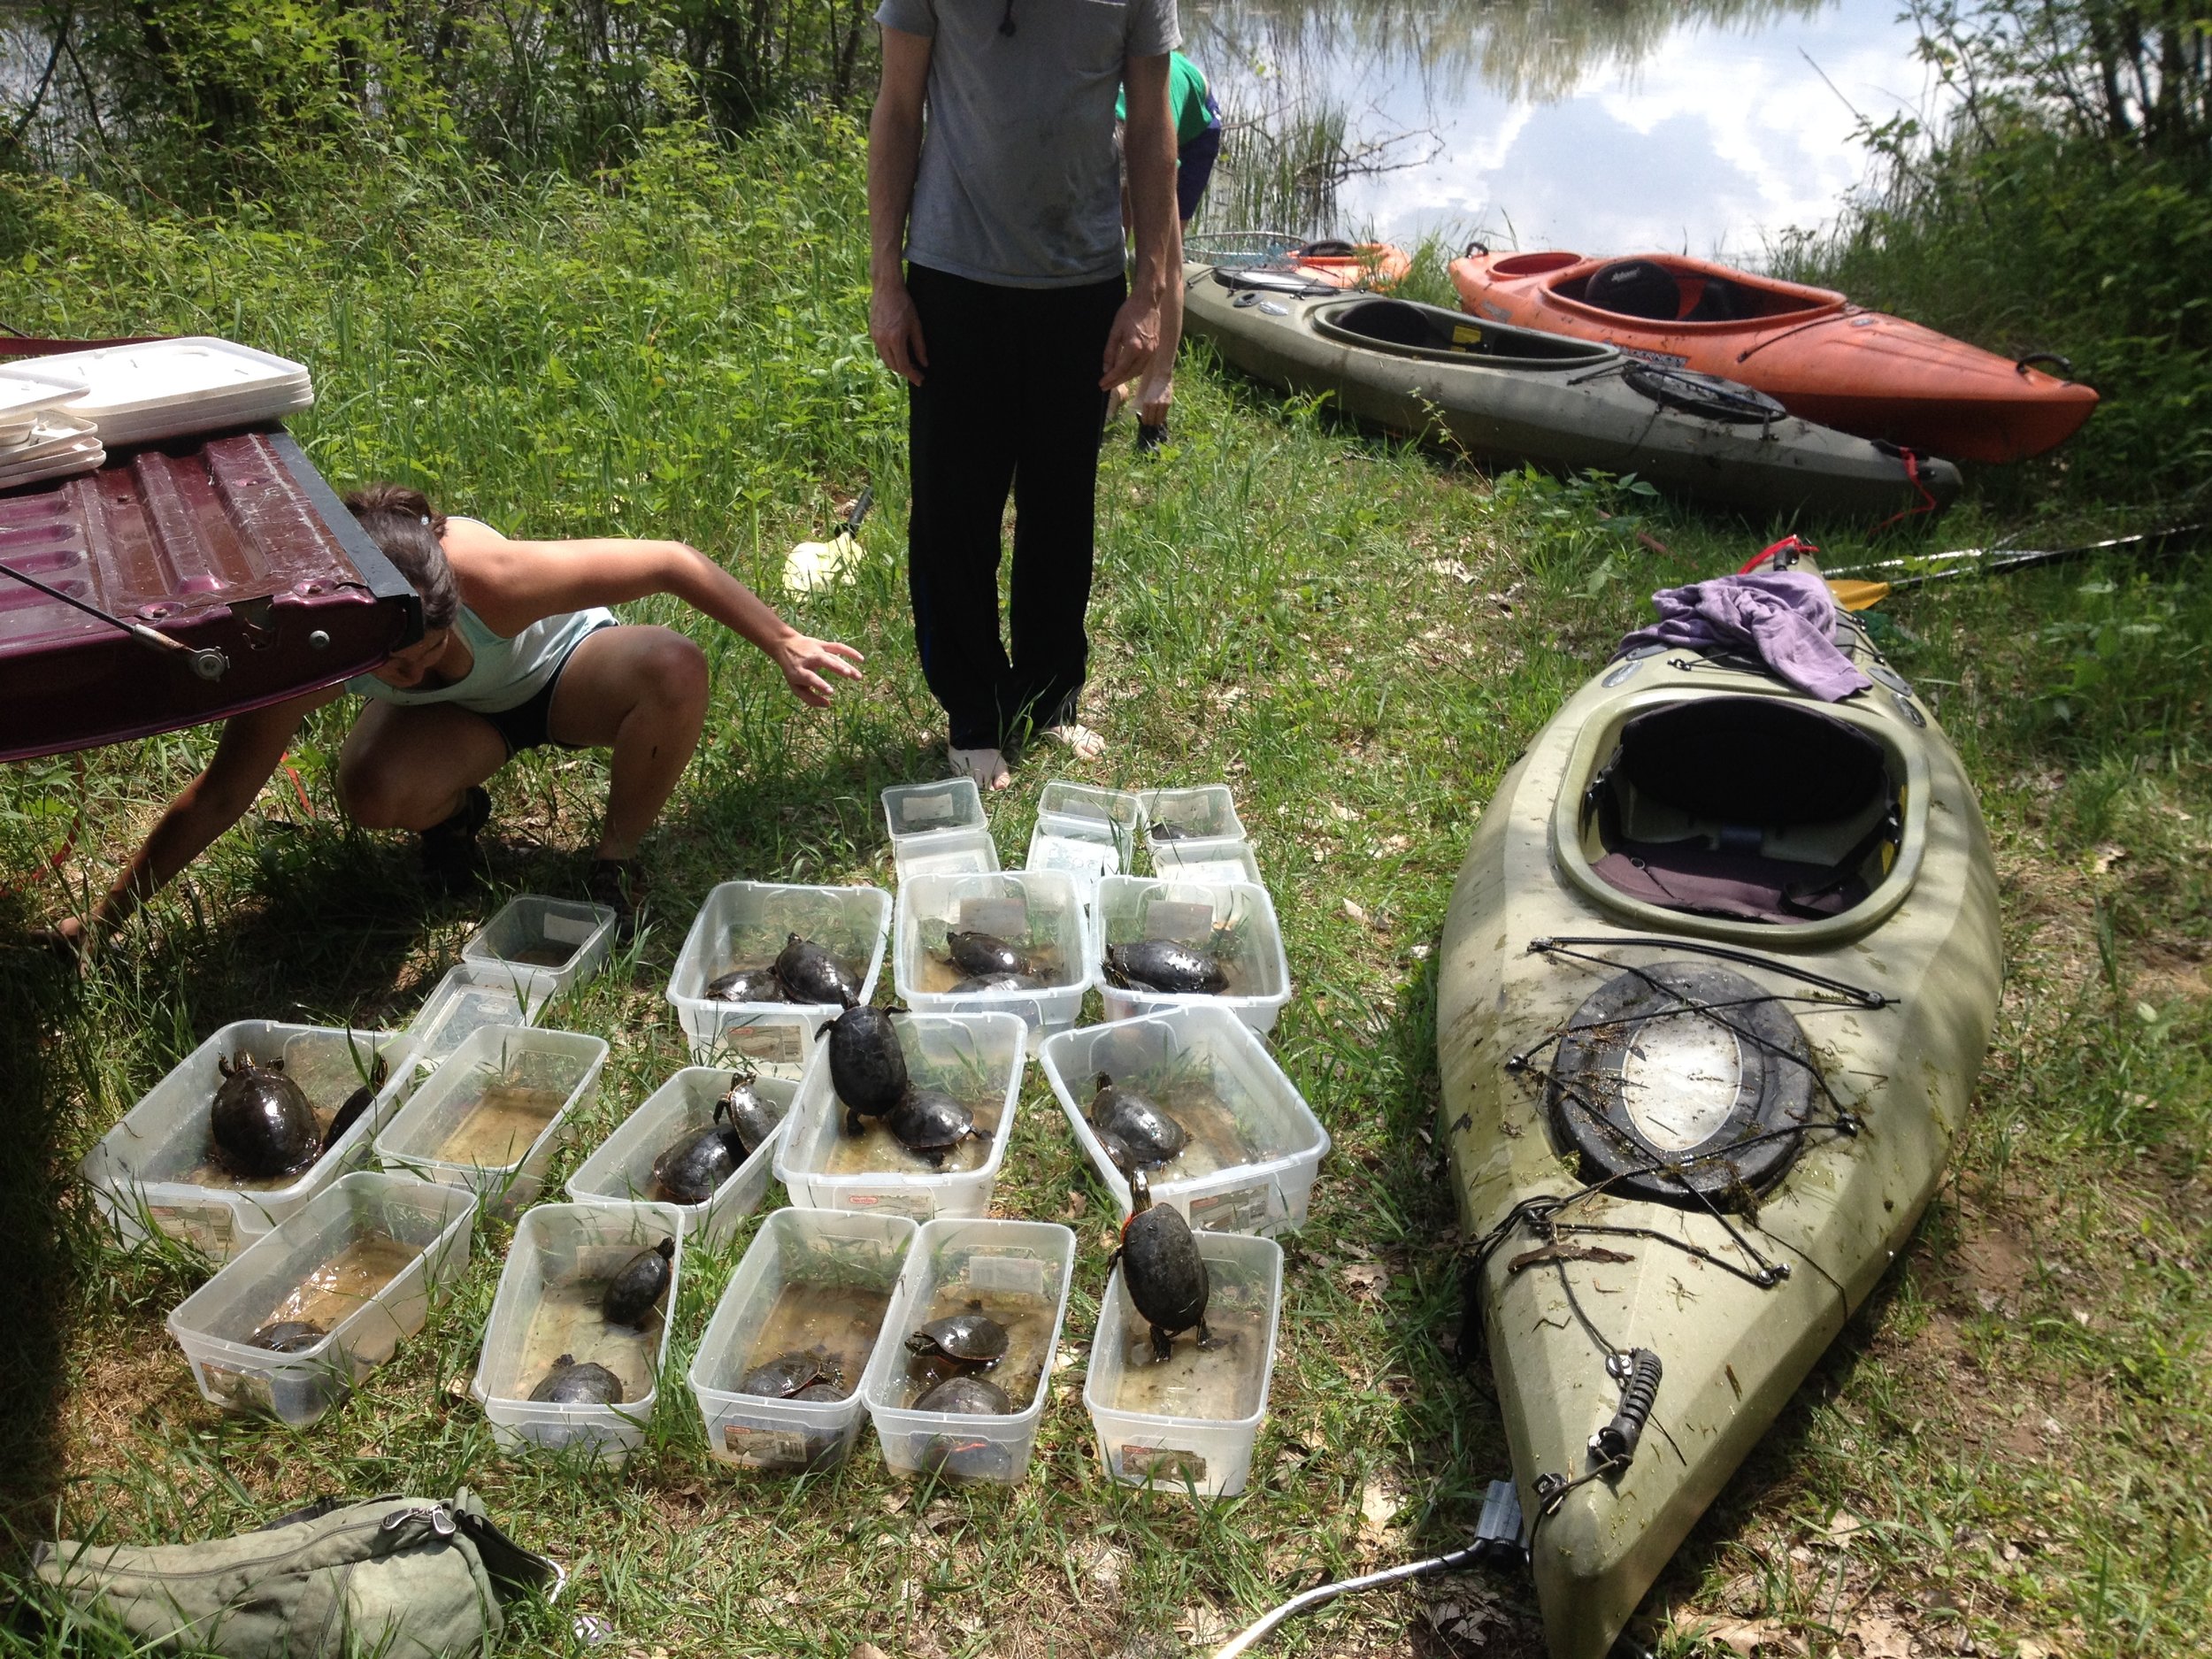 Bins of turtles next to a kayak after a successful morning of capturing